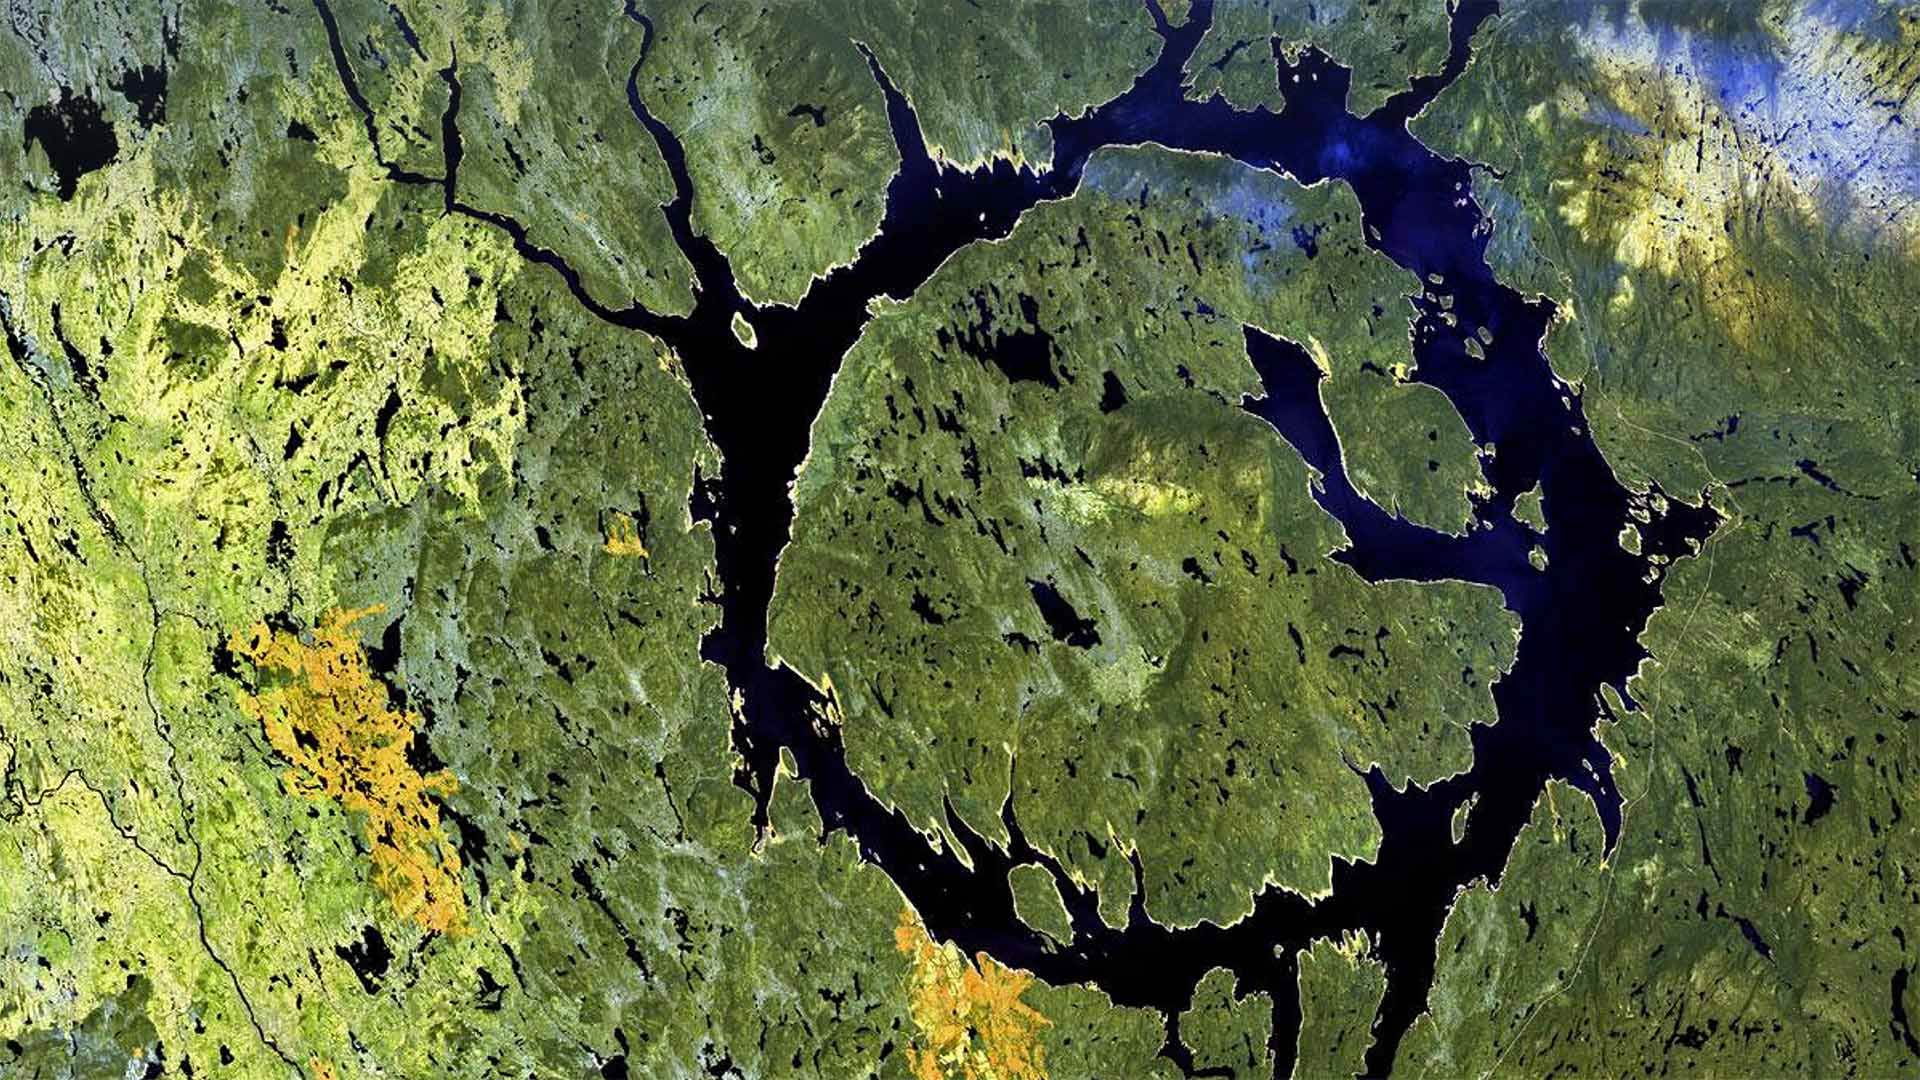 Manicouagan Crater in Québec, Canada - Universal History Archive/Universal Images Group via Getty Images)